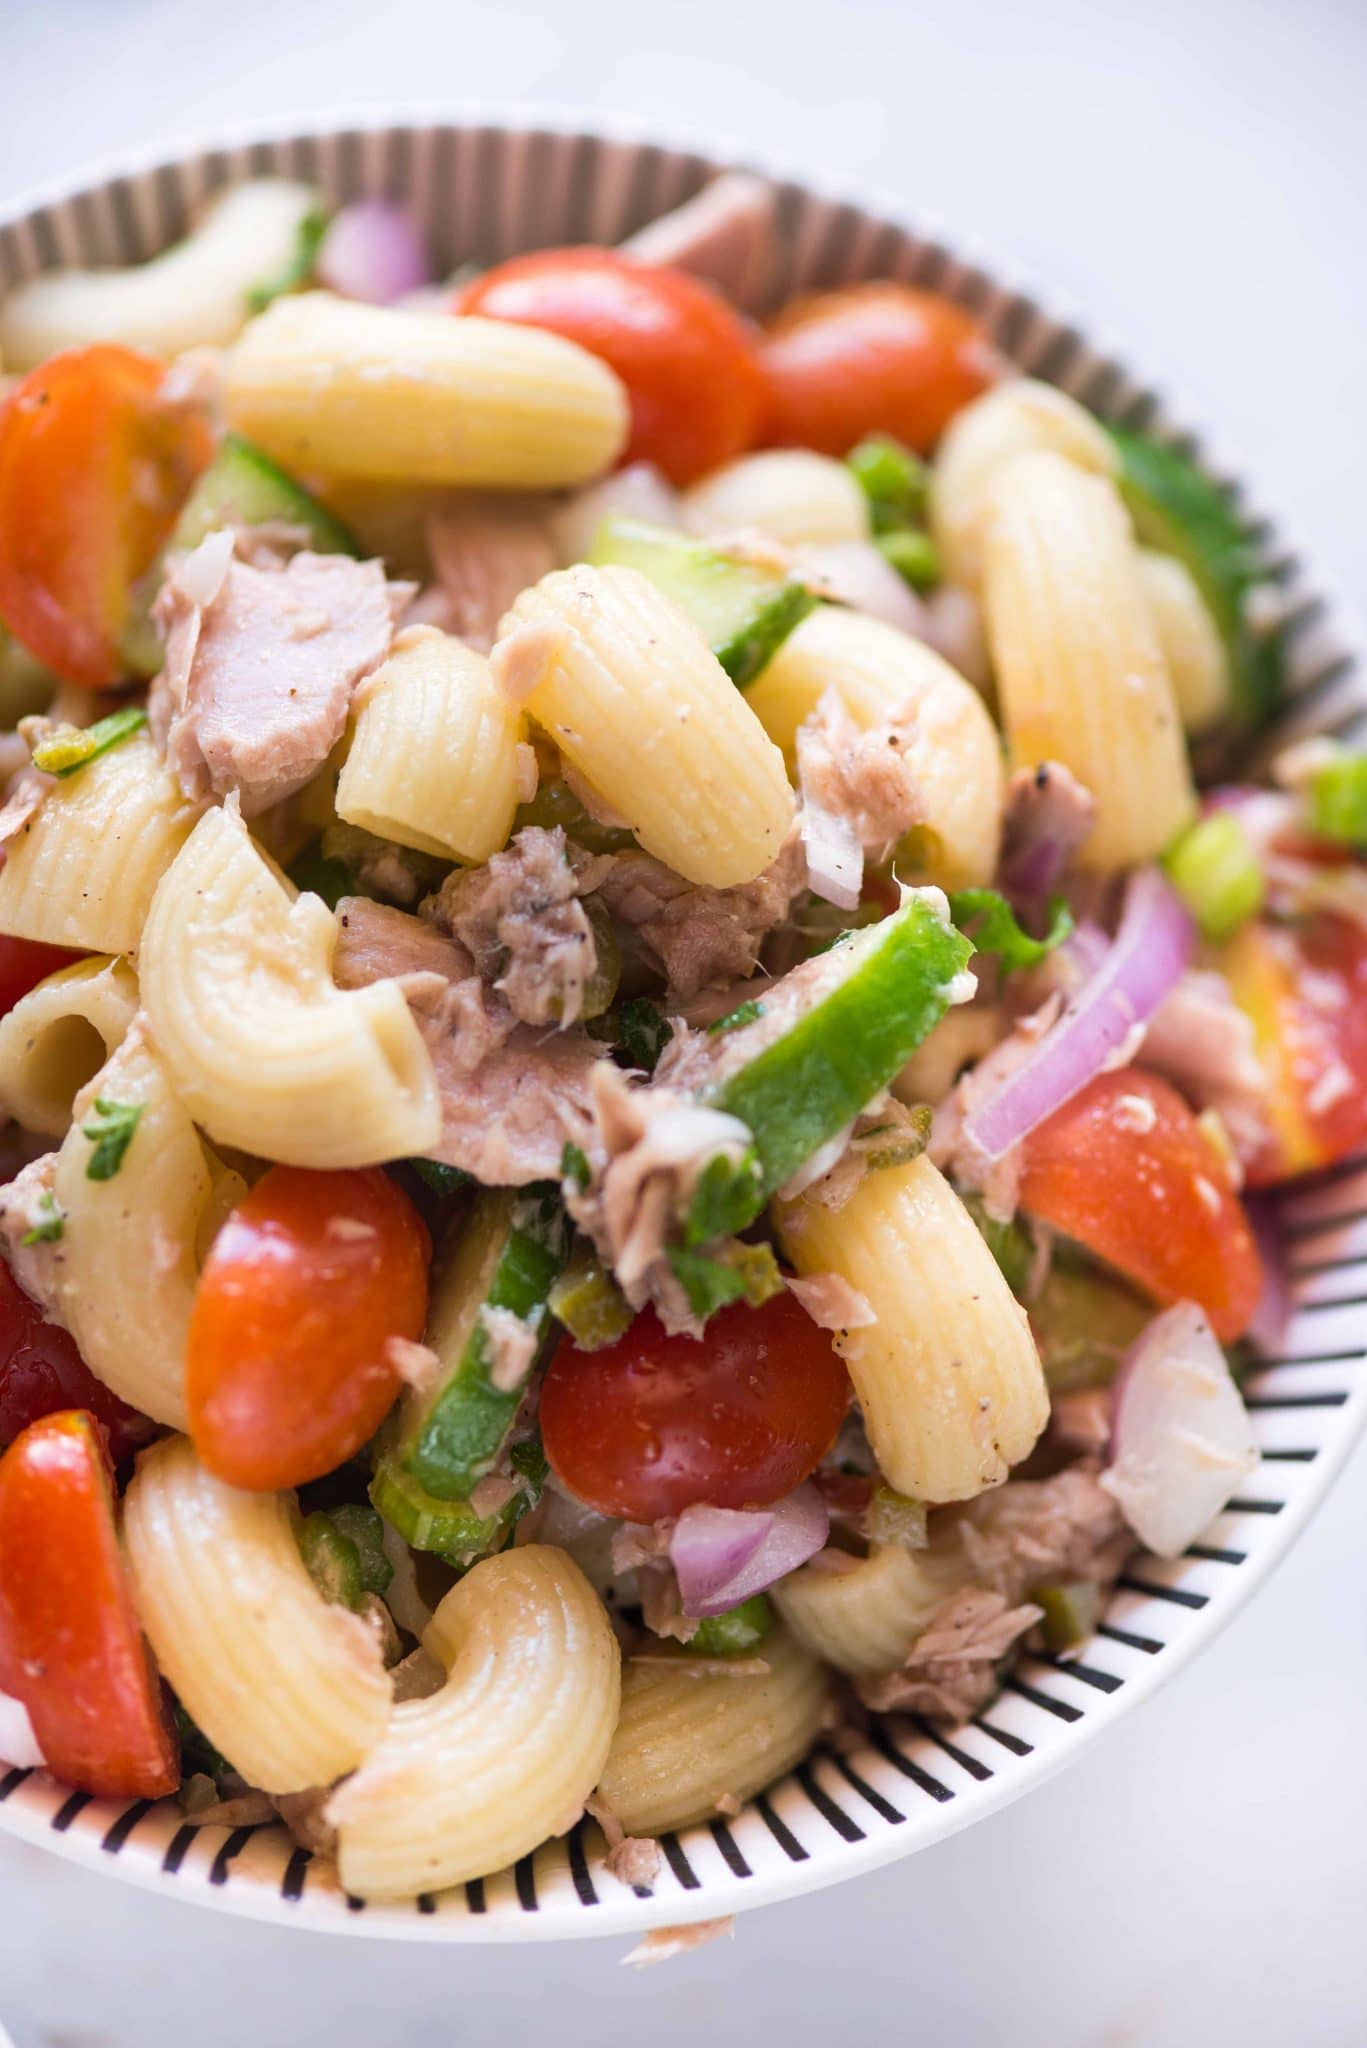 Cold Tuna Pasta Salad - The flavours of kitchen